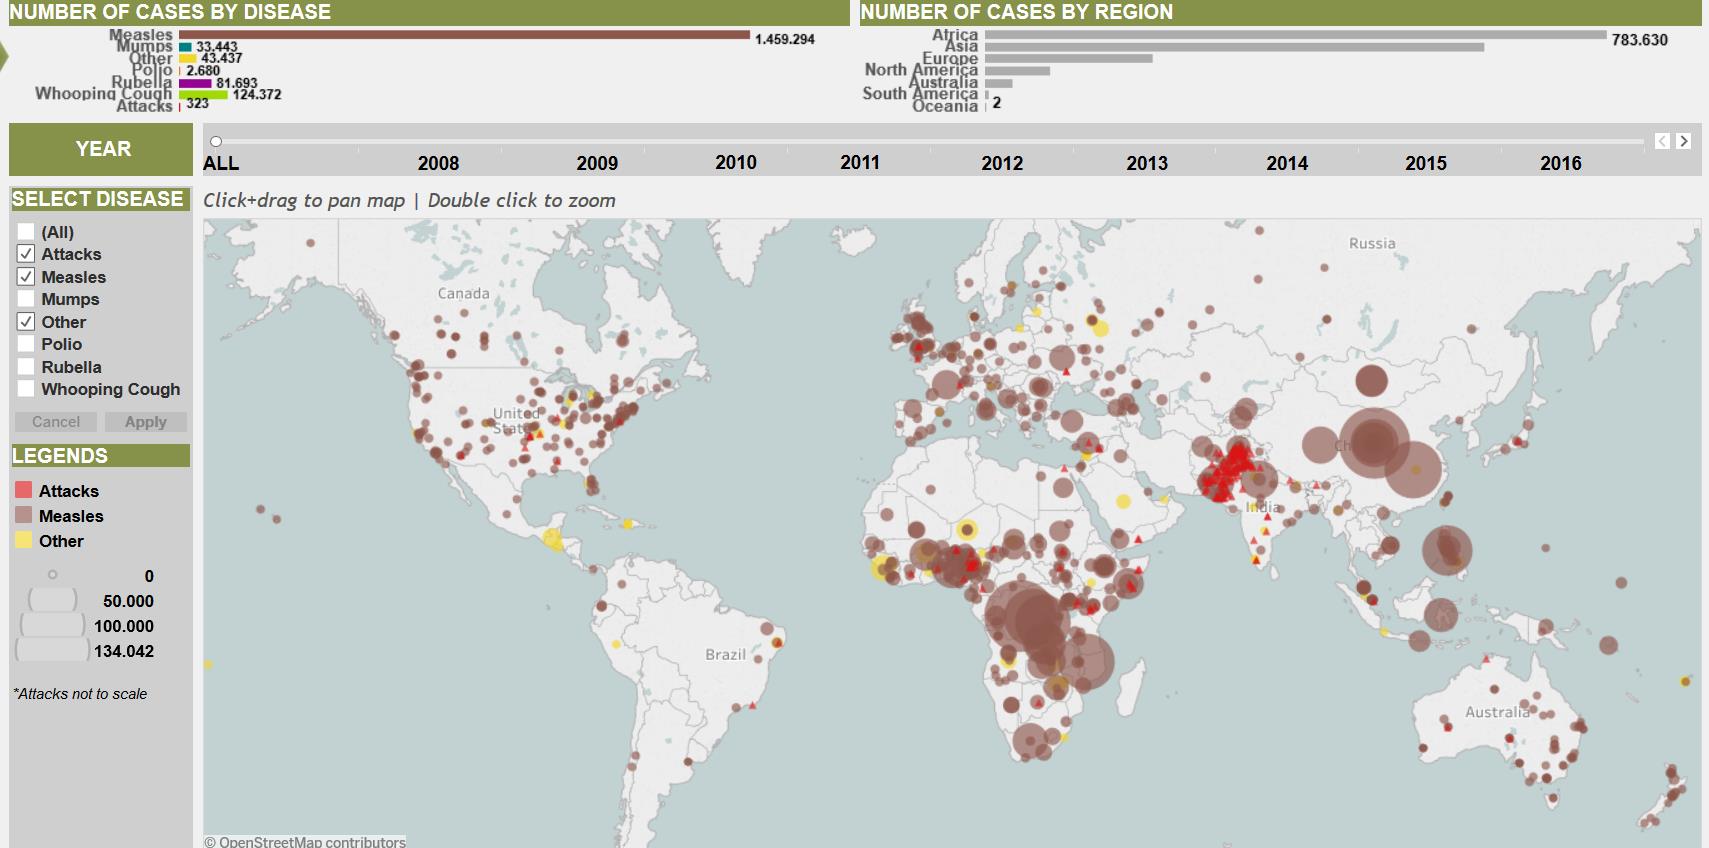 Council on Foreign Relations outbreaks dal 2008 al 2016 Source: http://www.cfr.org/interactives/gh_vaccine_map/index.html?